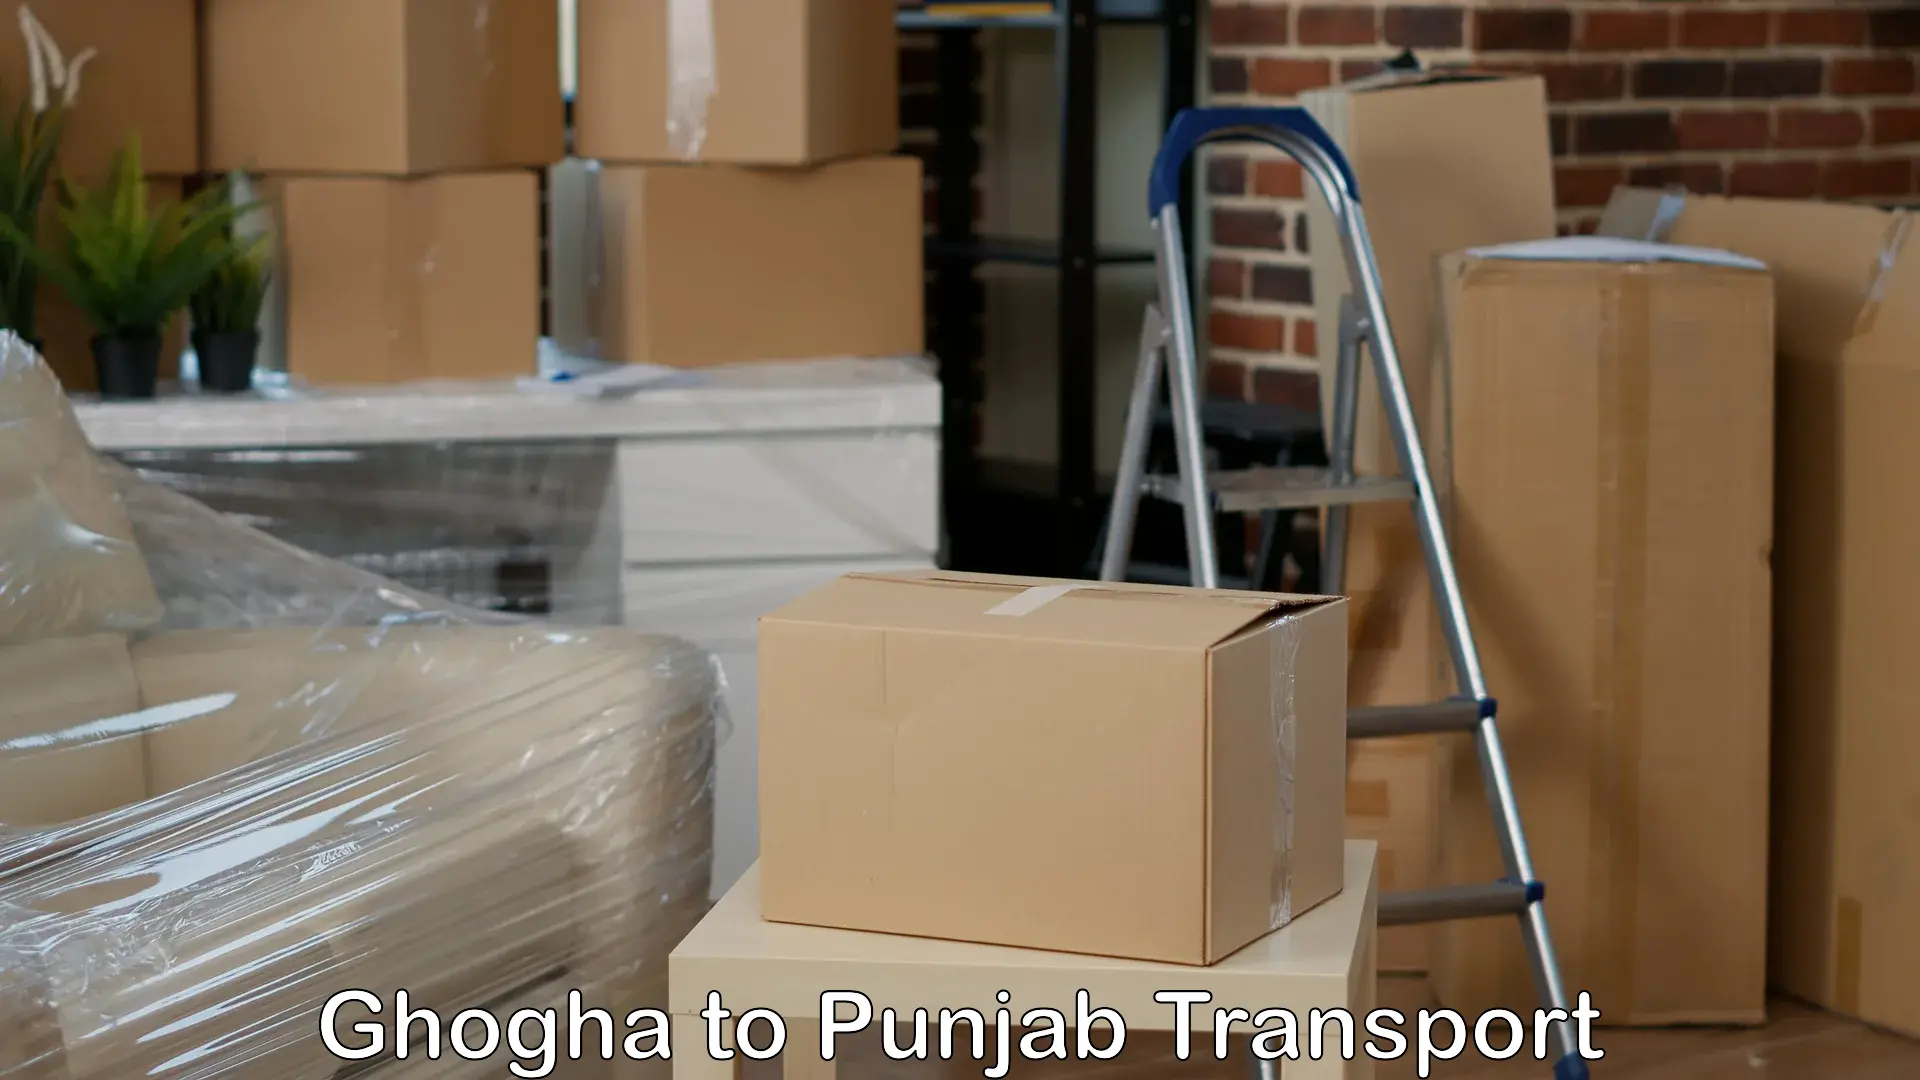 Truck transport companies in India Ghogha to Mohali